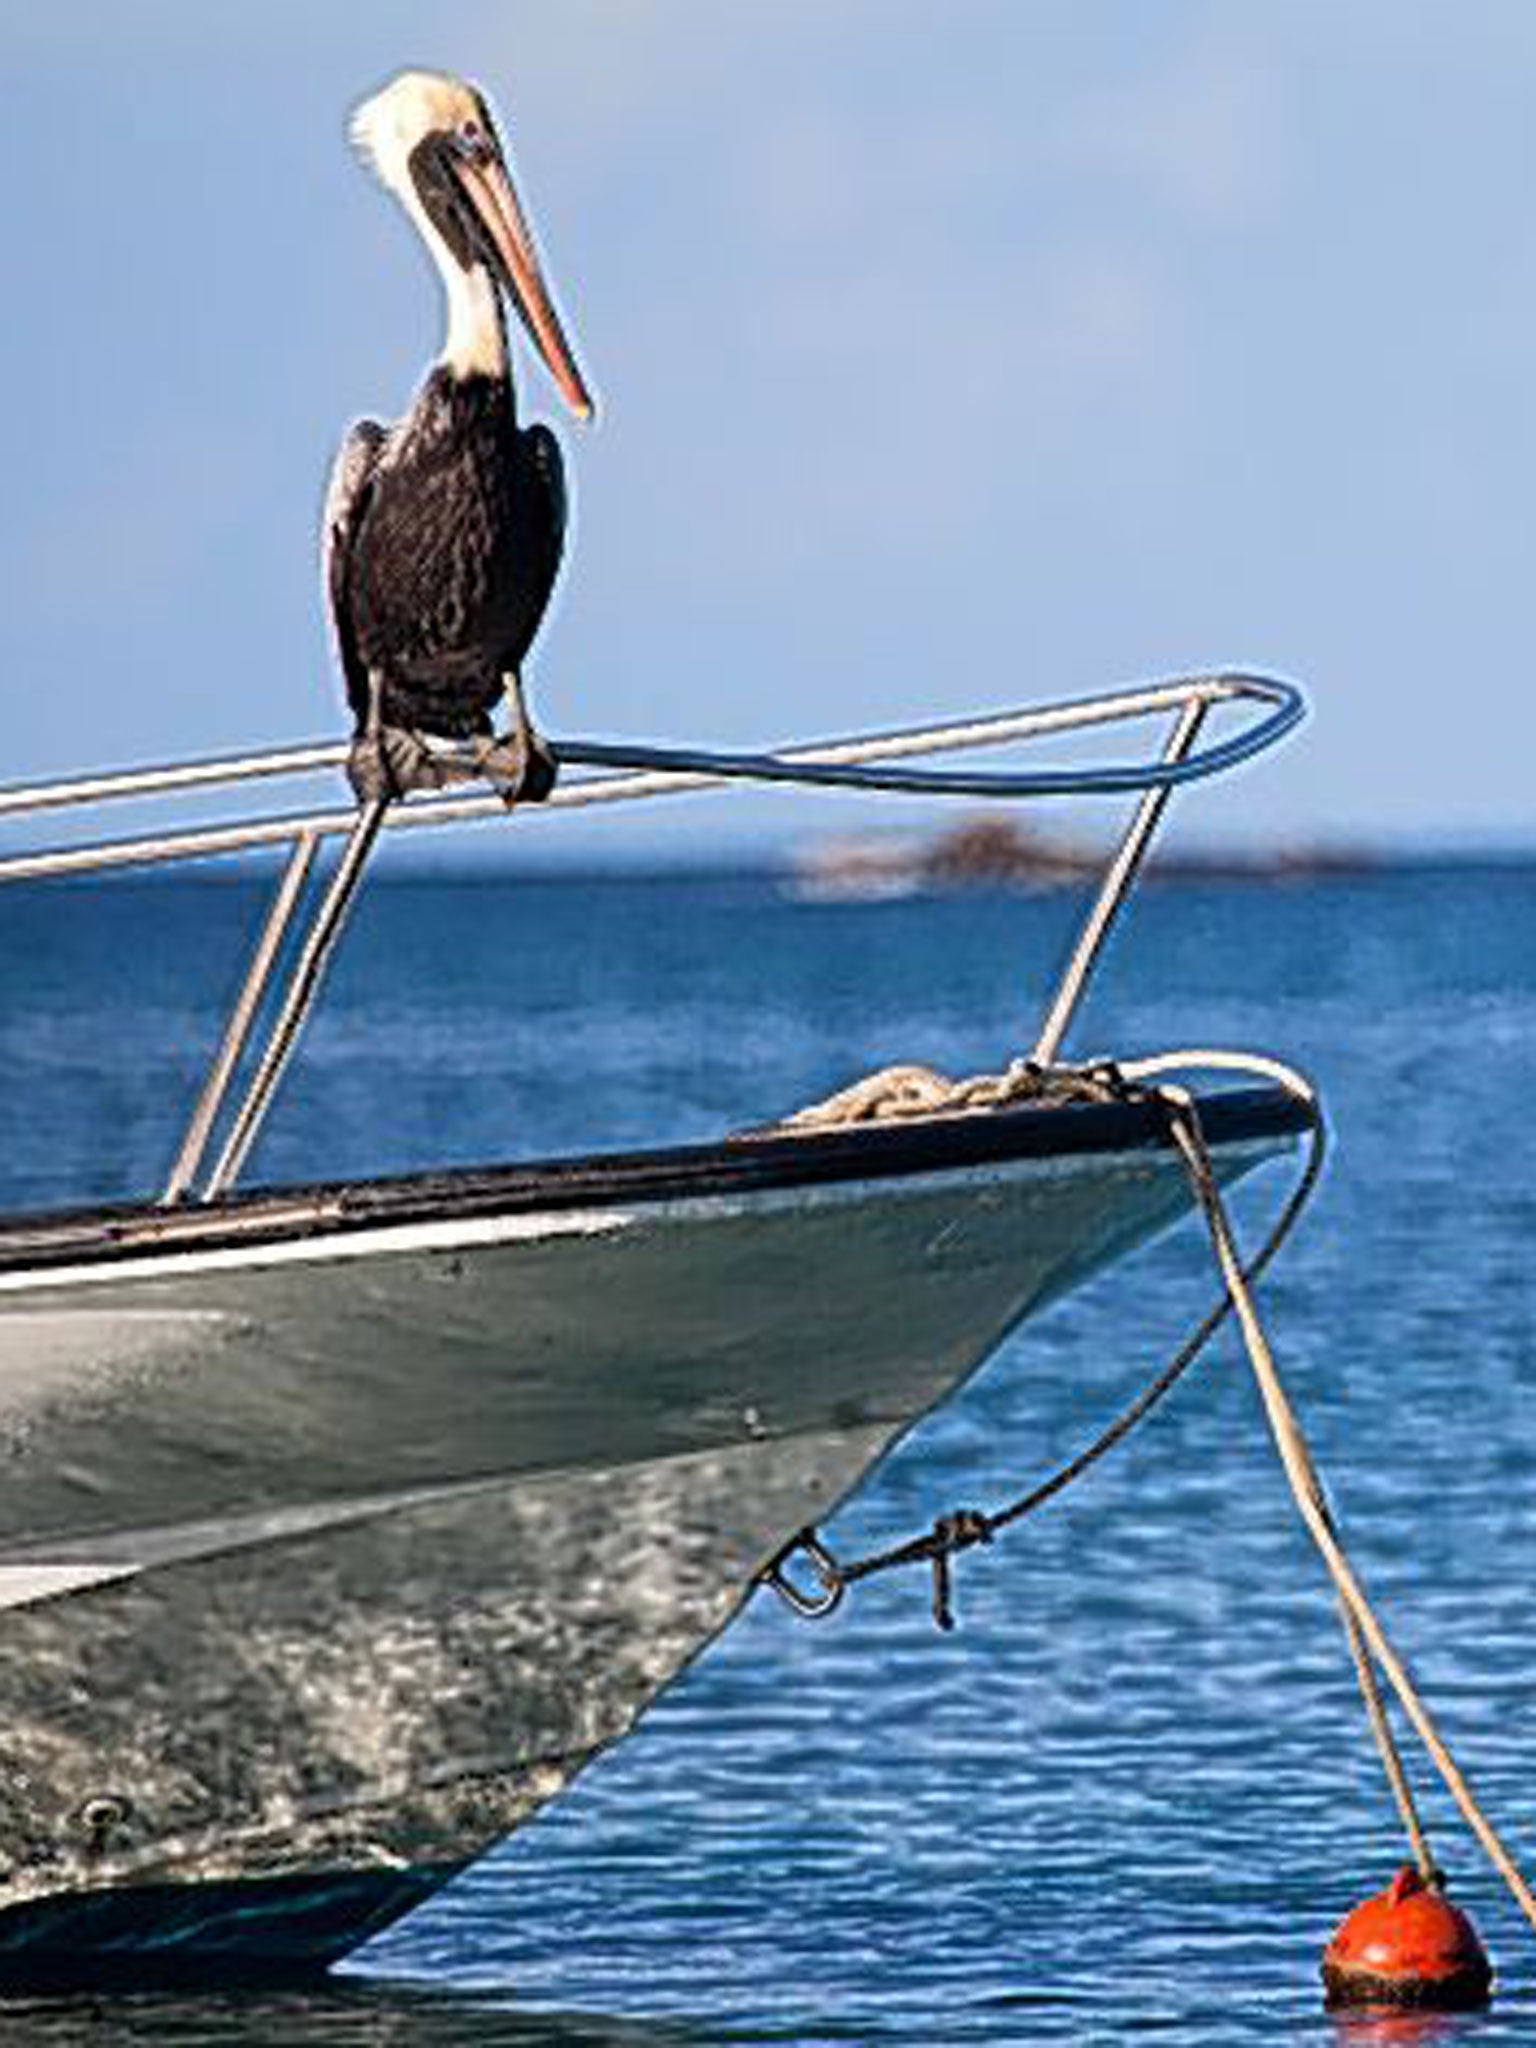 A pelican settles in for the ride